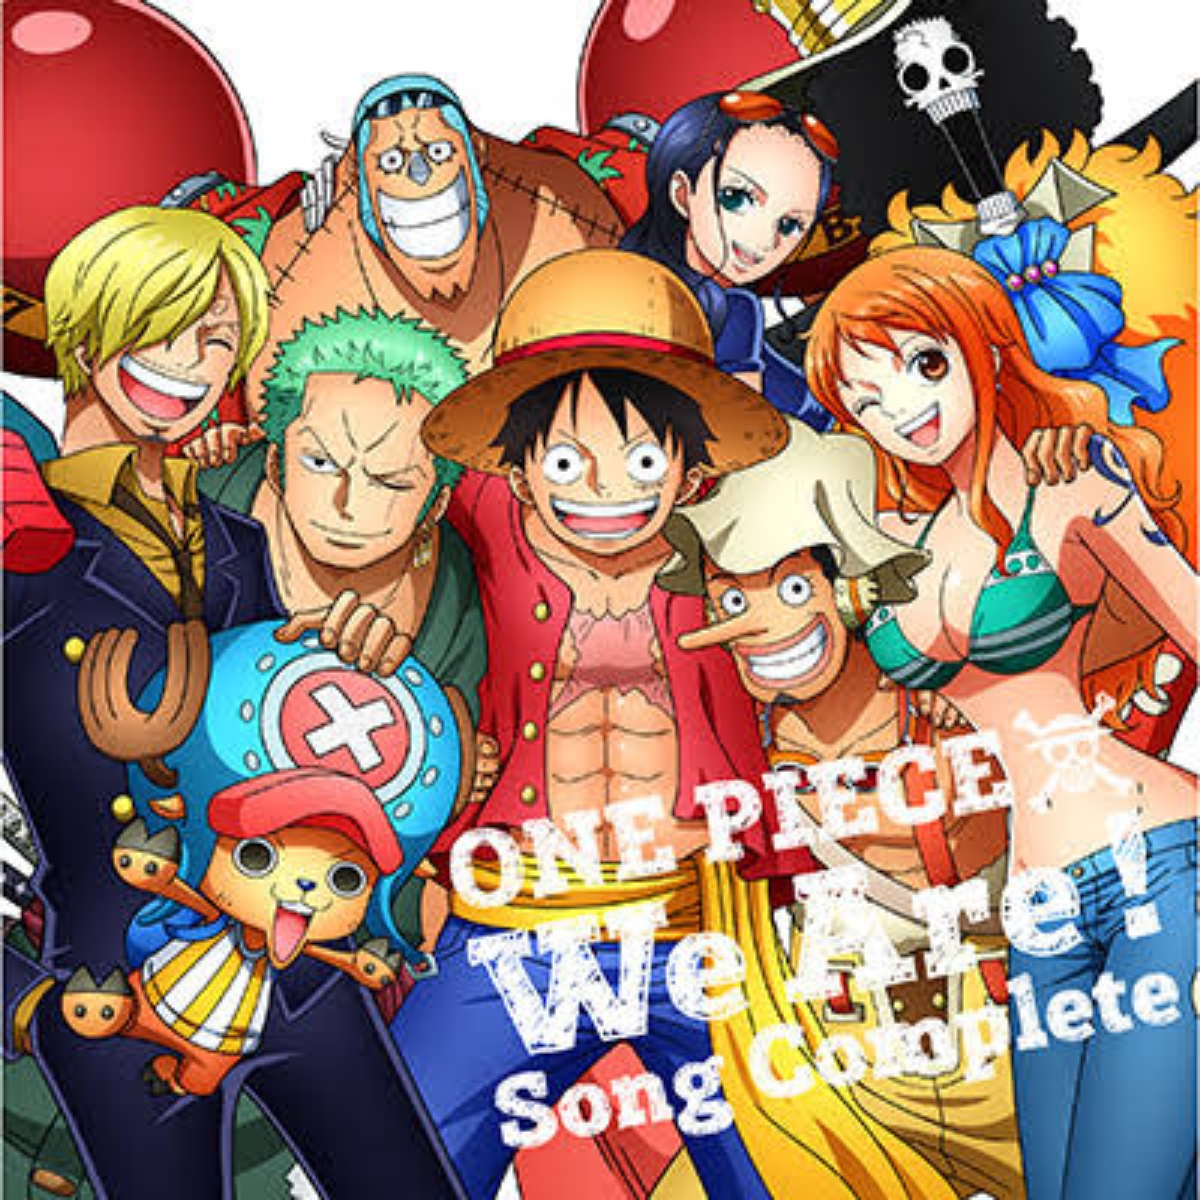 The Straw Hat Pirates - We Are!